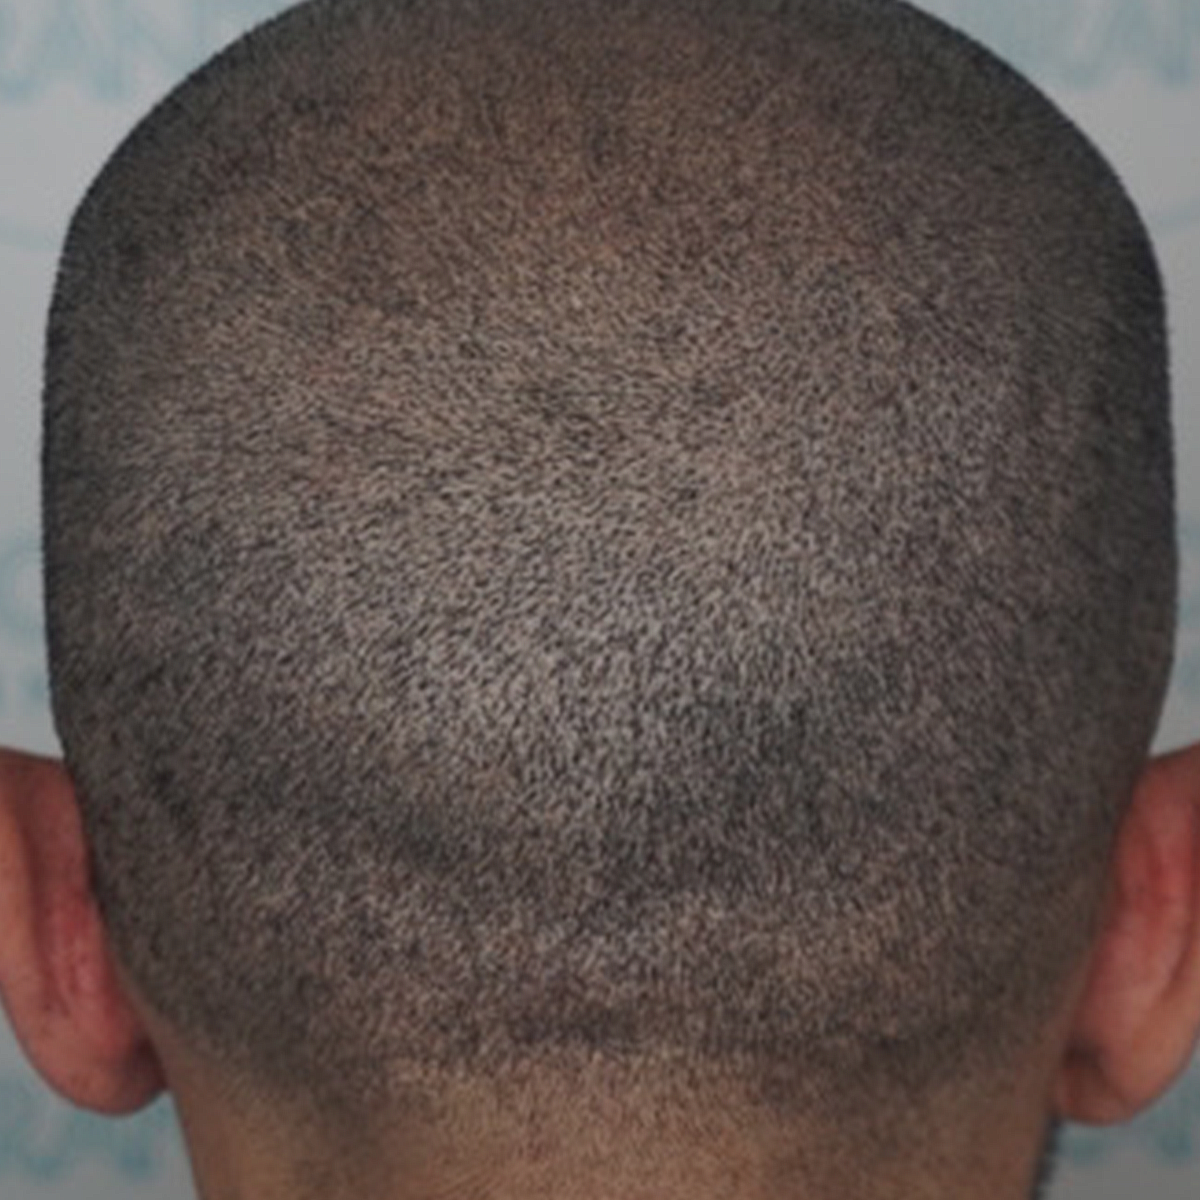 FUE Scars - After Treatment